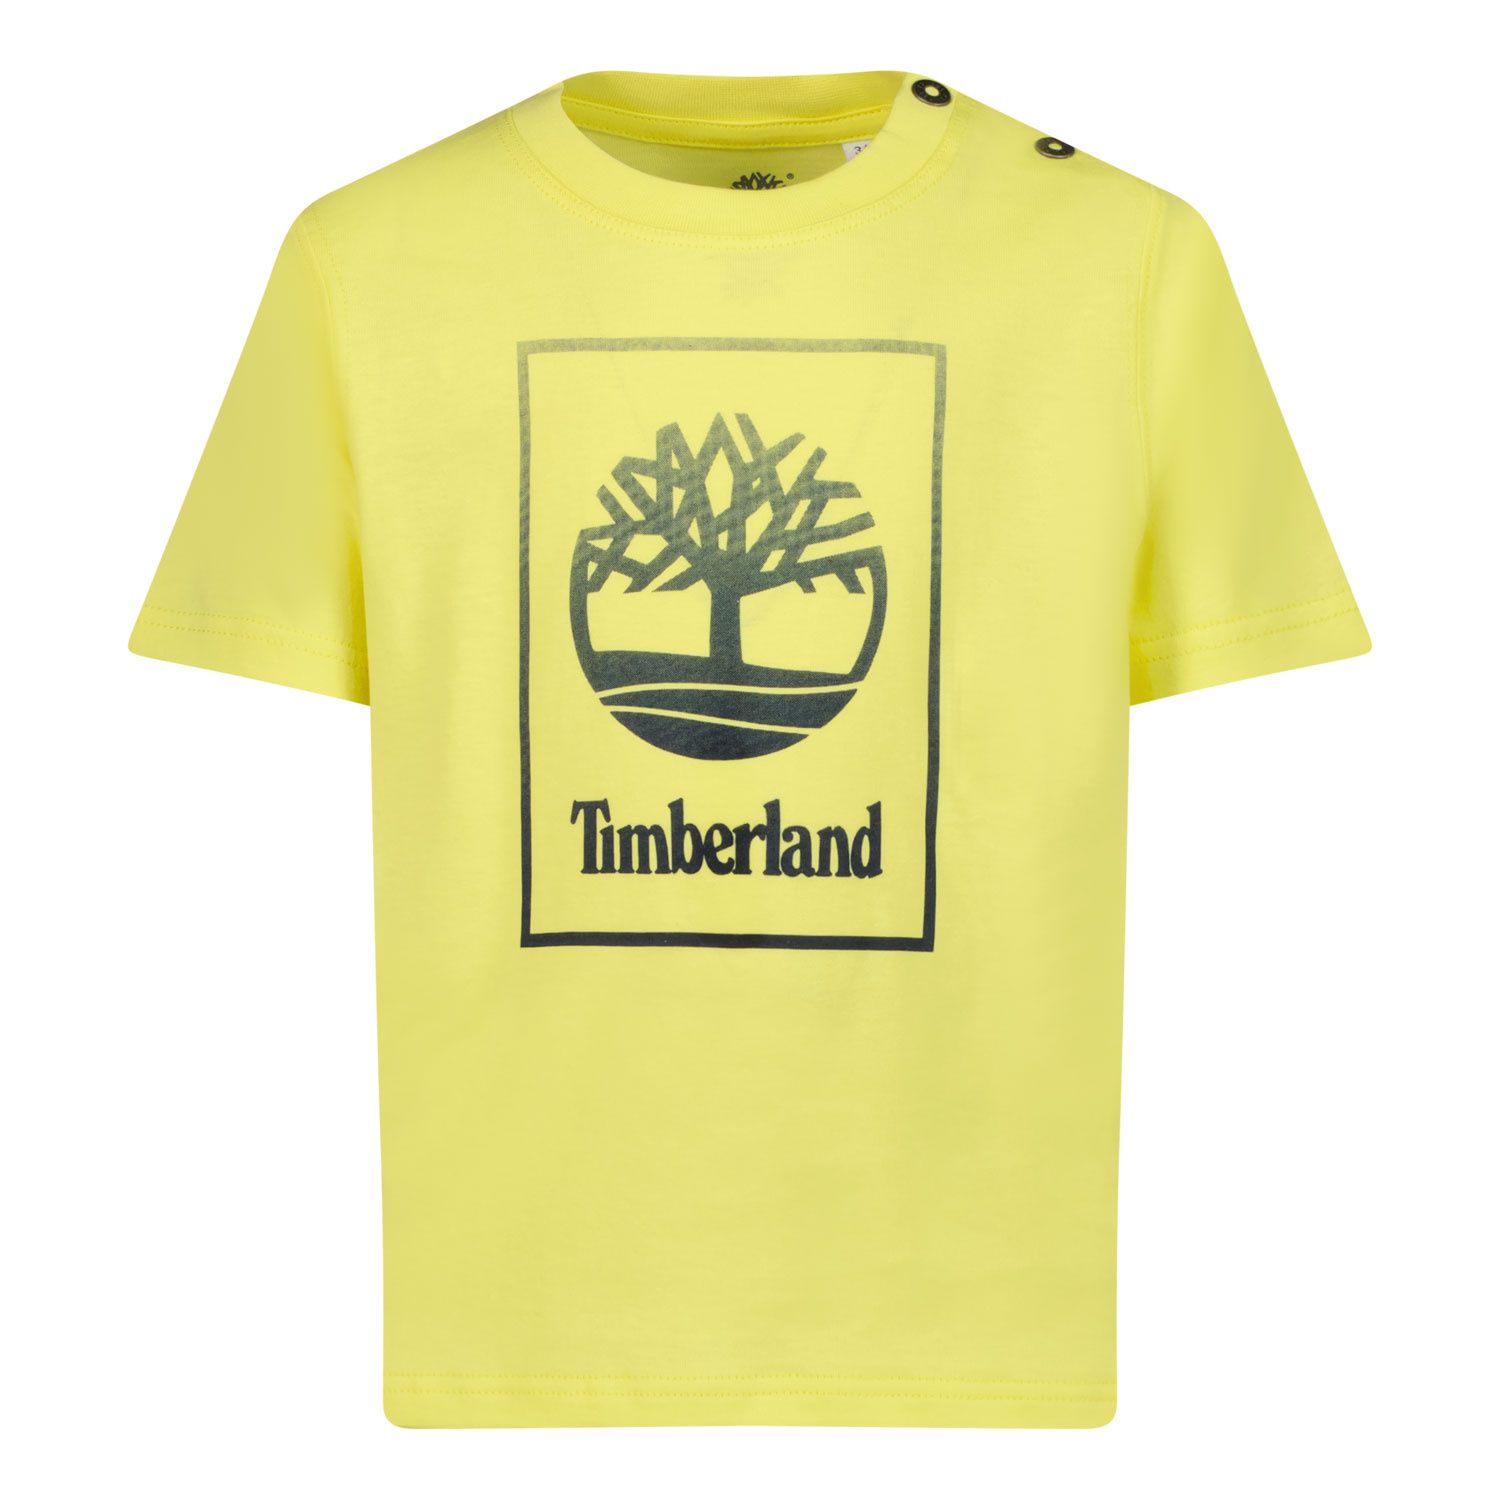 Picture of Timberland T05K40 baby shirt yellow